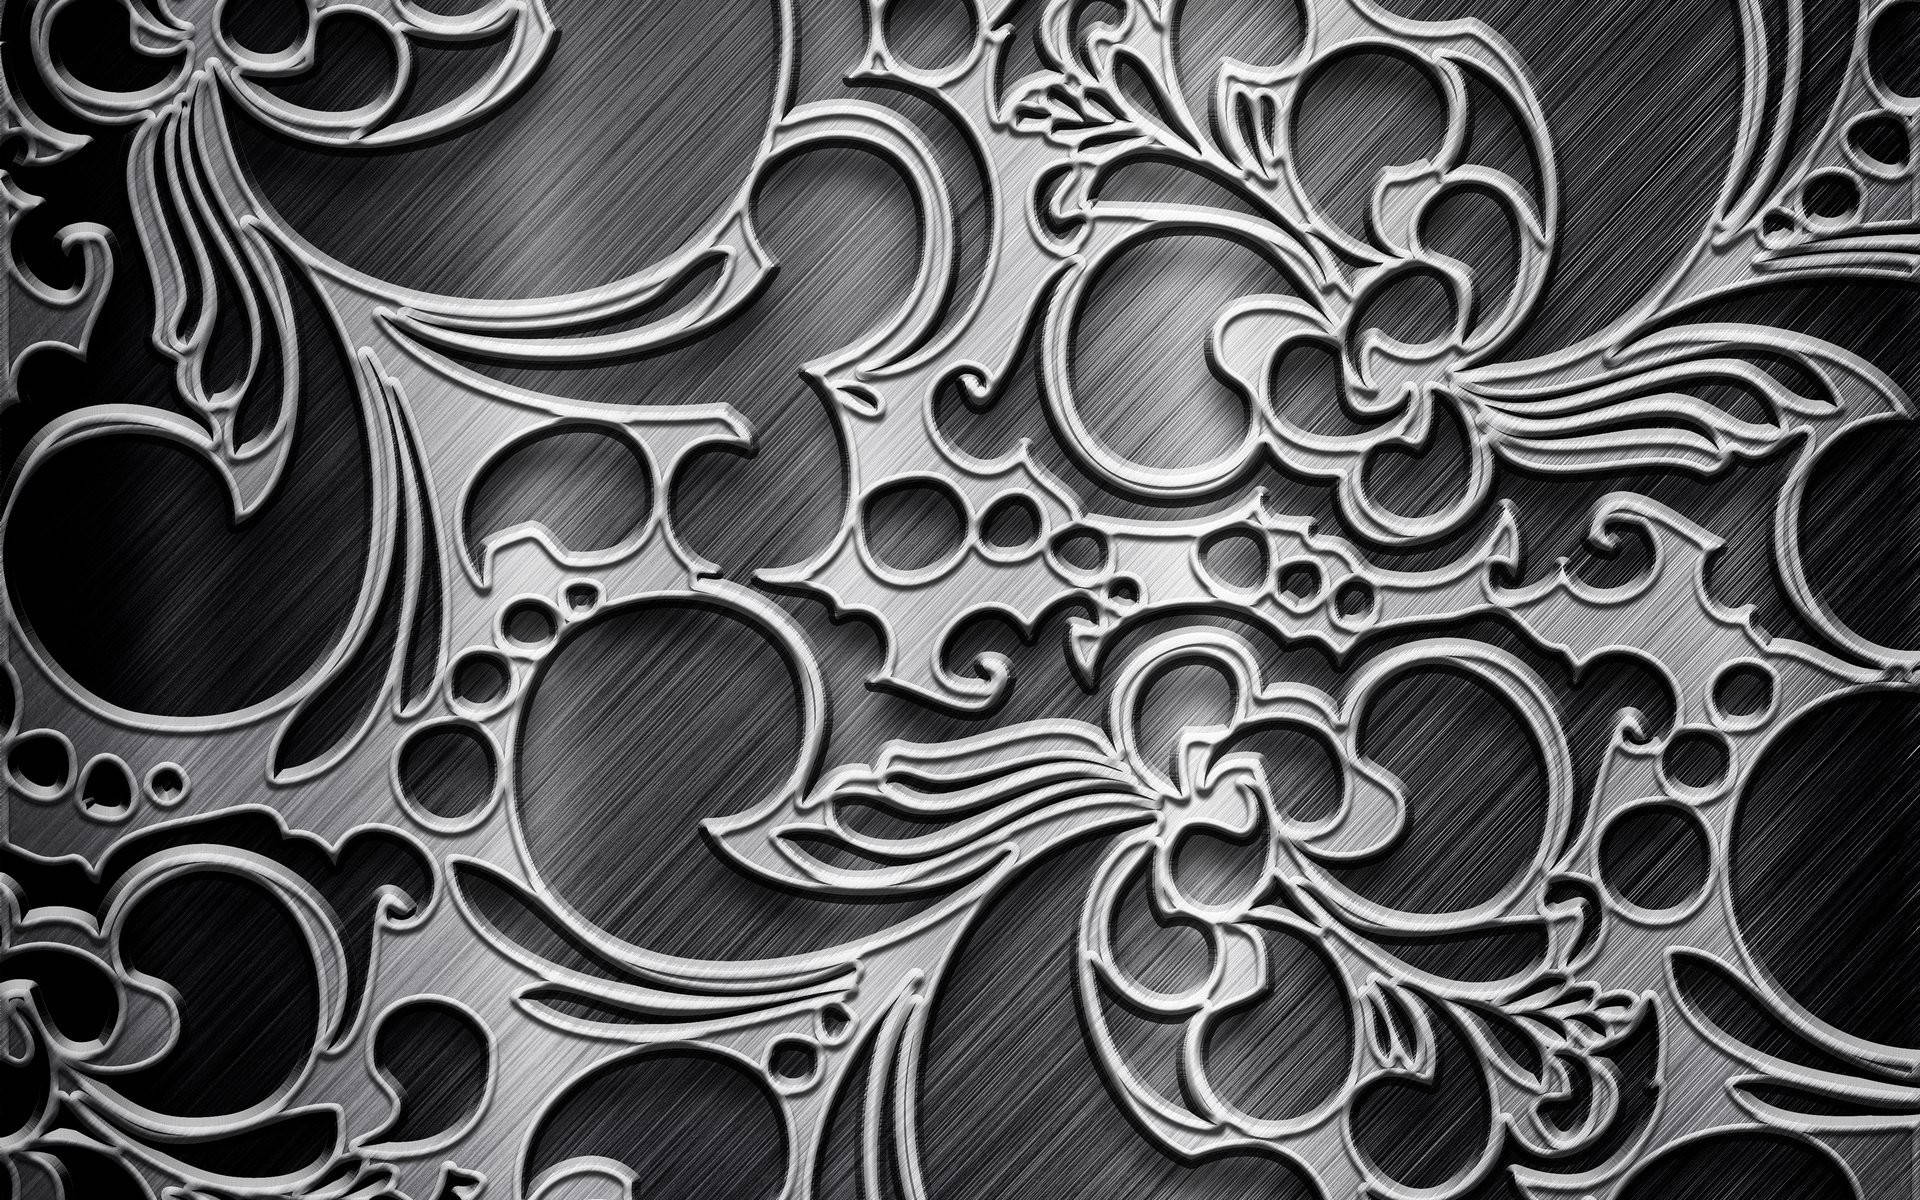 Ornate Patterned Metal Texture